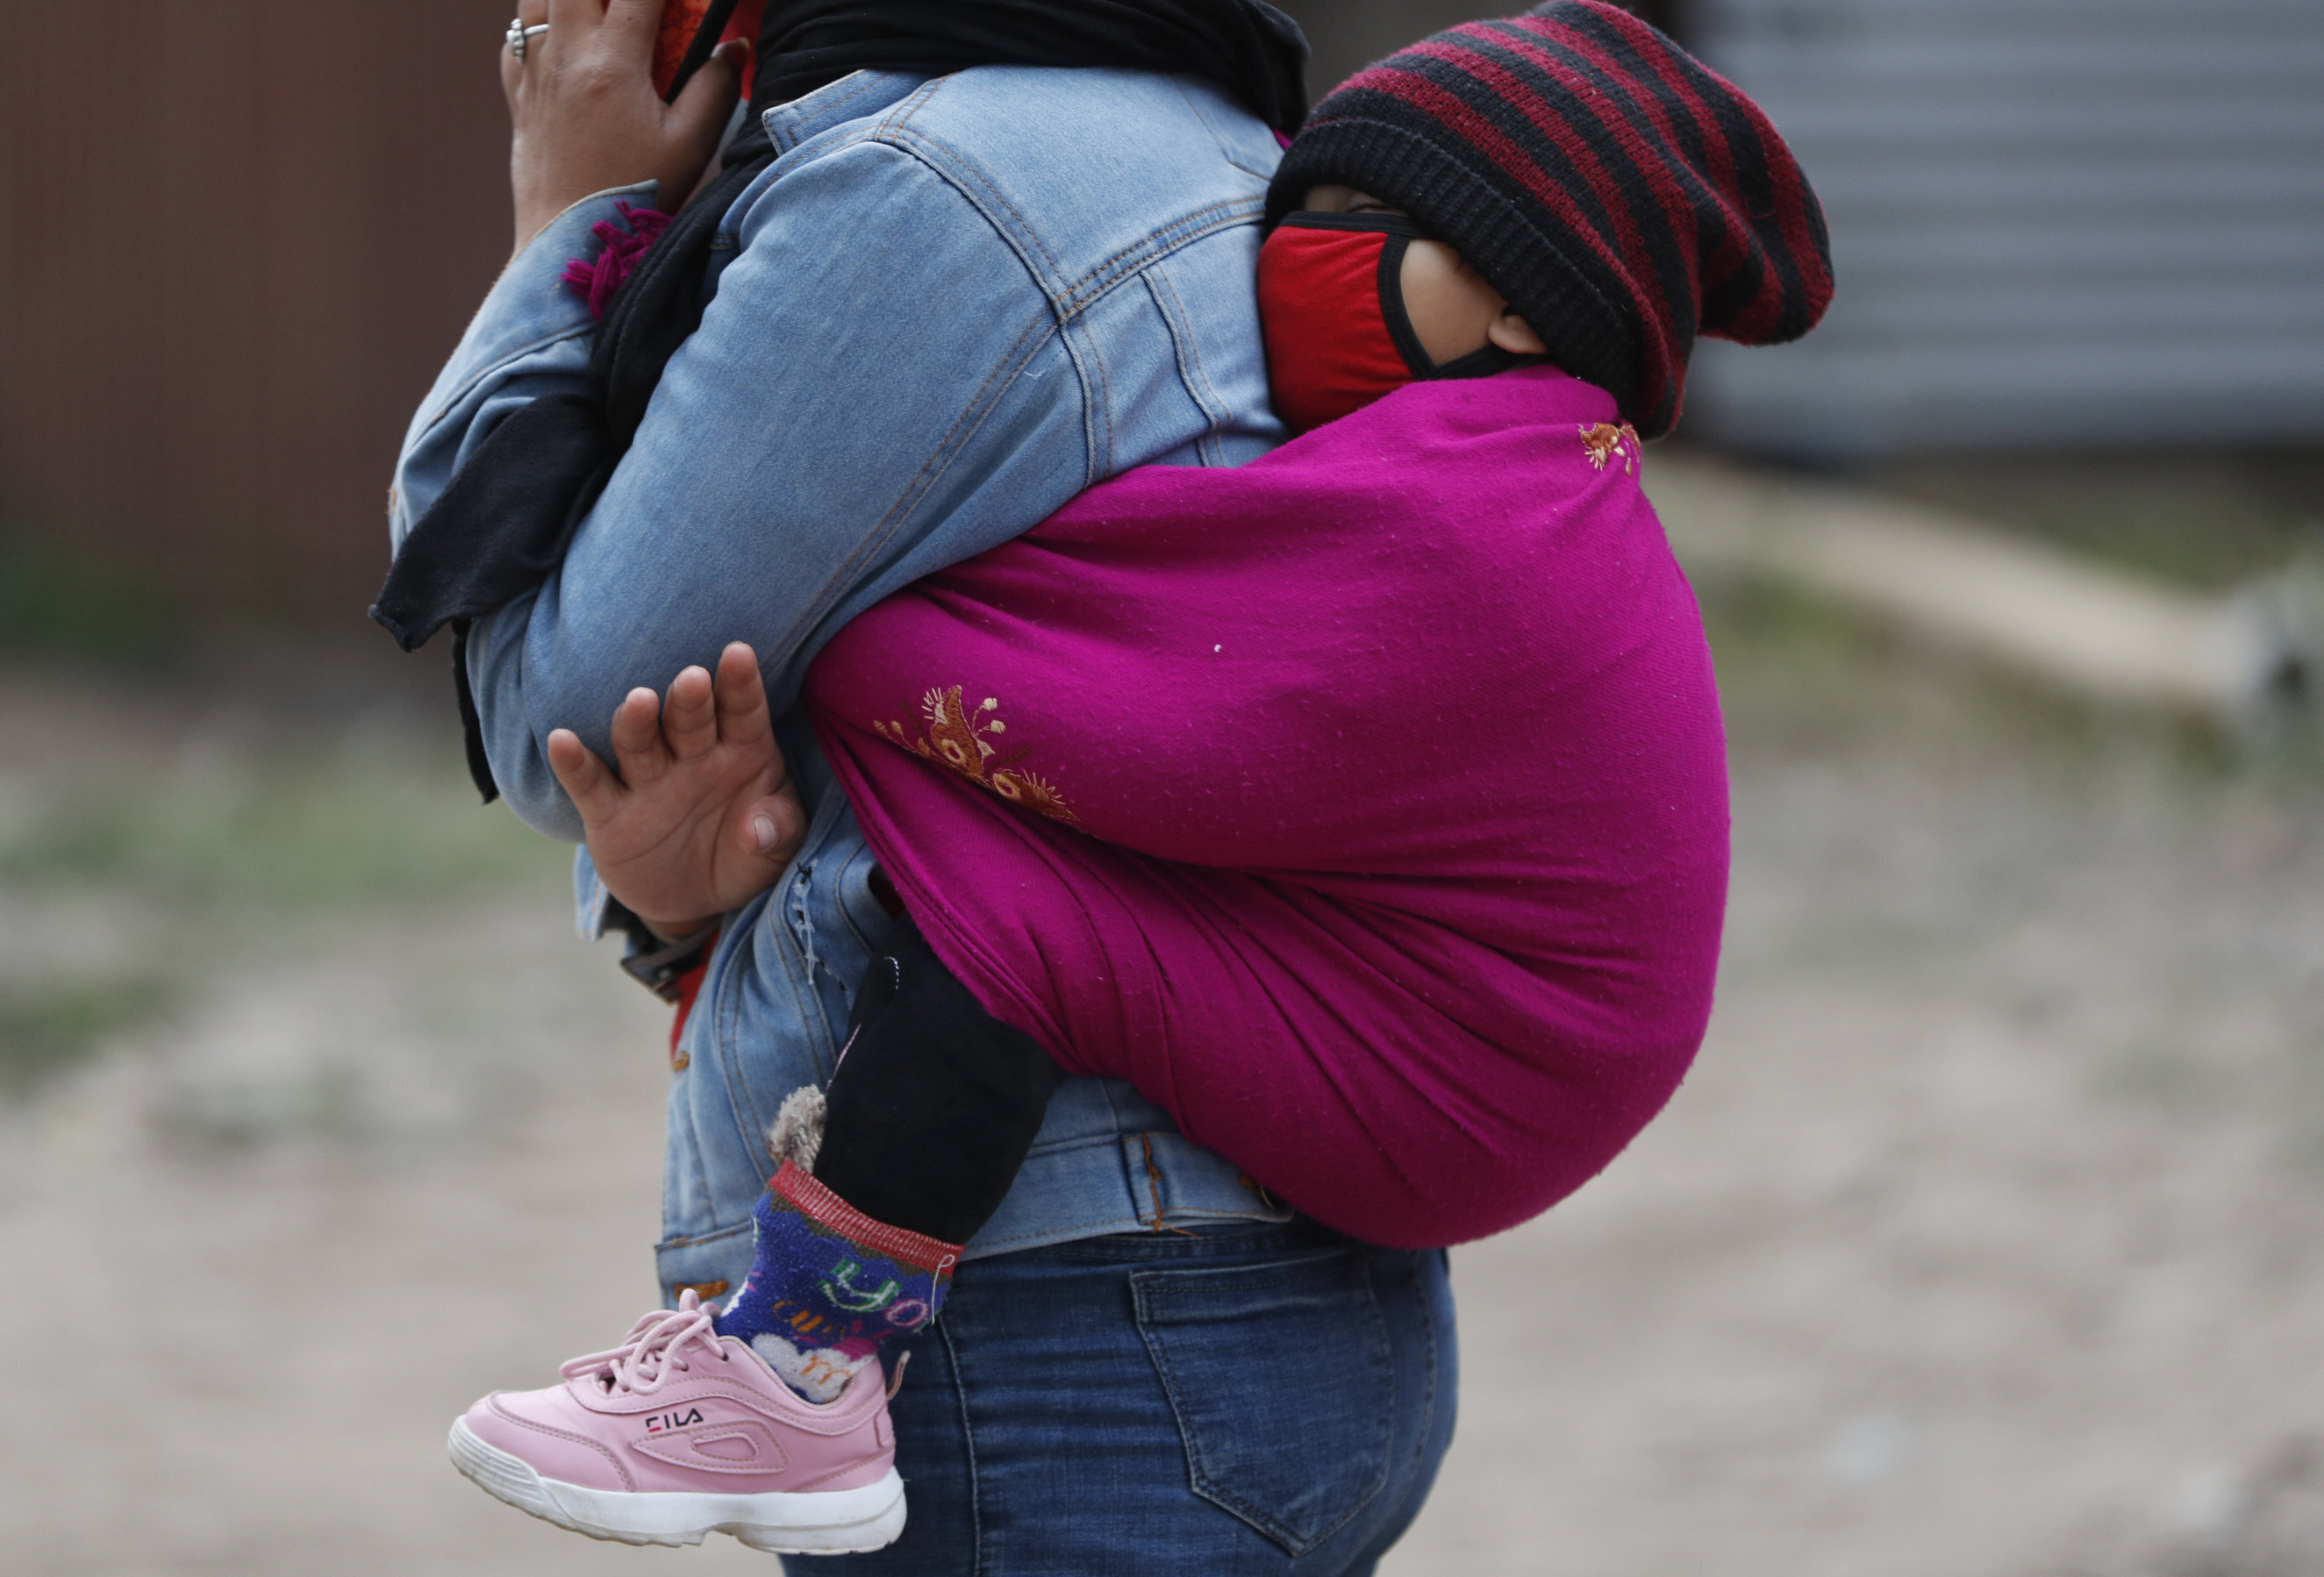 A Nepalese woman carries her child as she waits for a vehicle to go back to her village, during lockdown to prevent the spread of the new coronavirus in Bhaktapur, Nepal, Monday, April 20, 2020. The supreme court passed an interim order on Friday instructing the Nepalese government to ensure free transportation for stranded daily wage workers and others making the long journey back to their respective villages on foot. (AP Photo/Niranjan Shrestha)